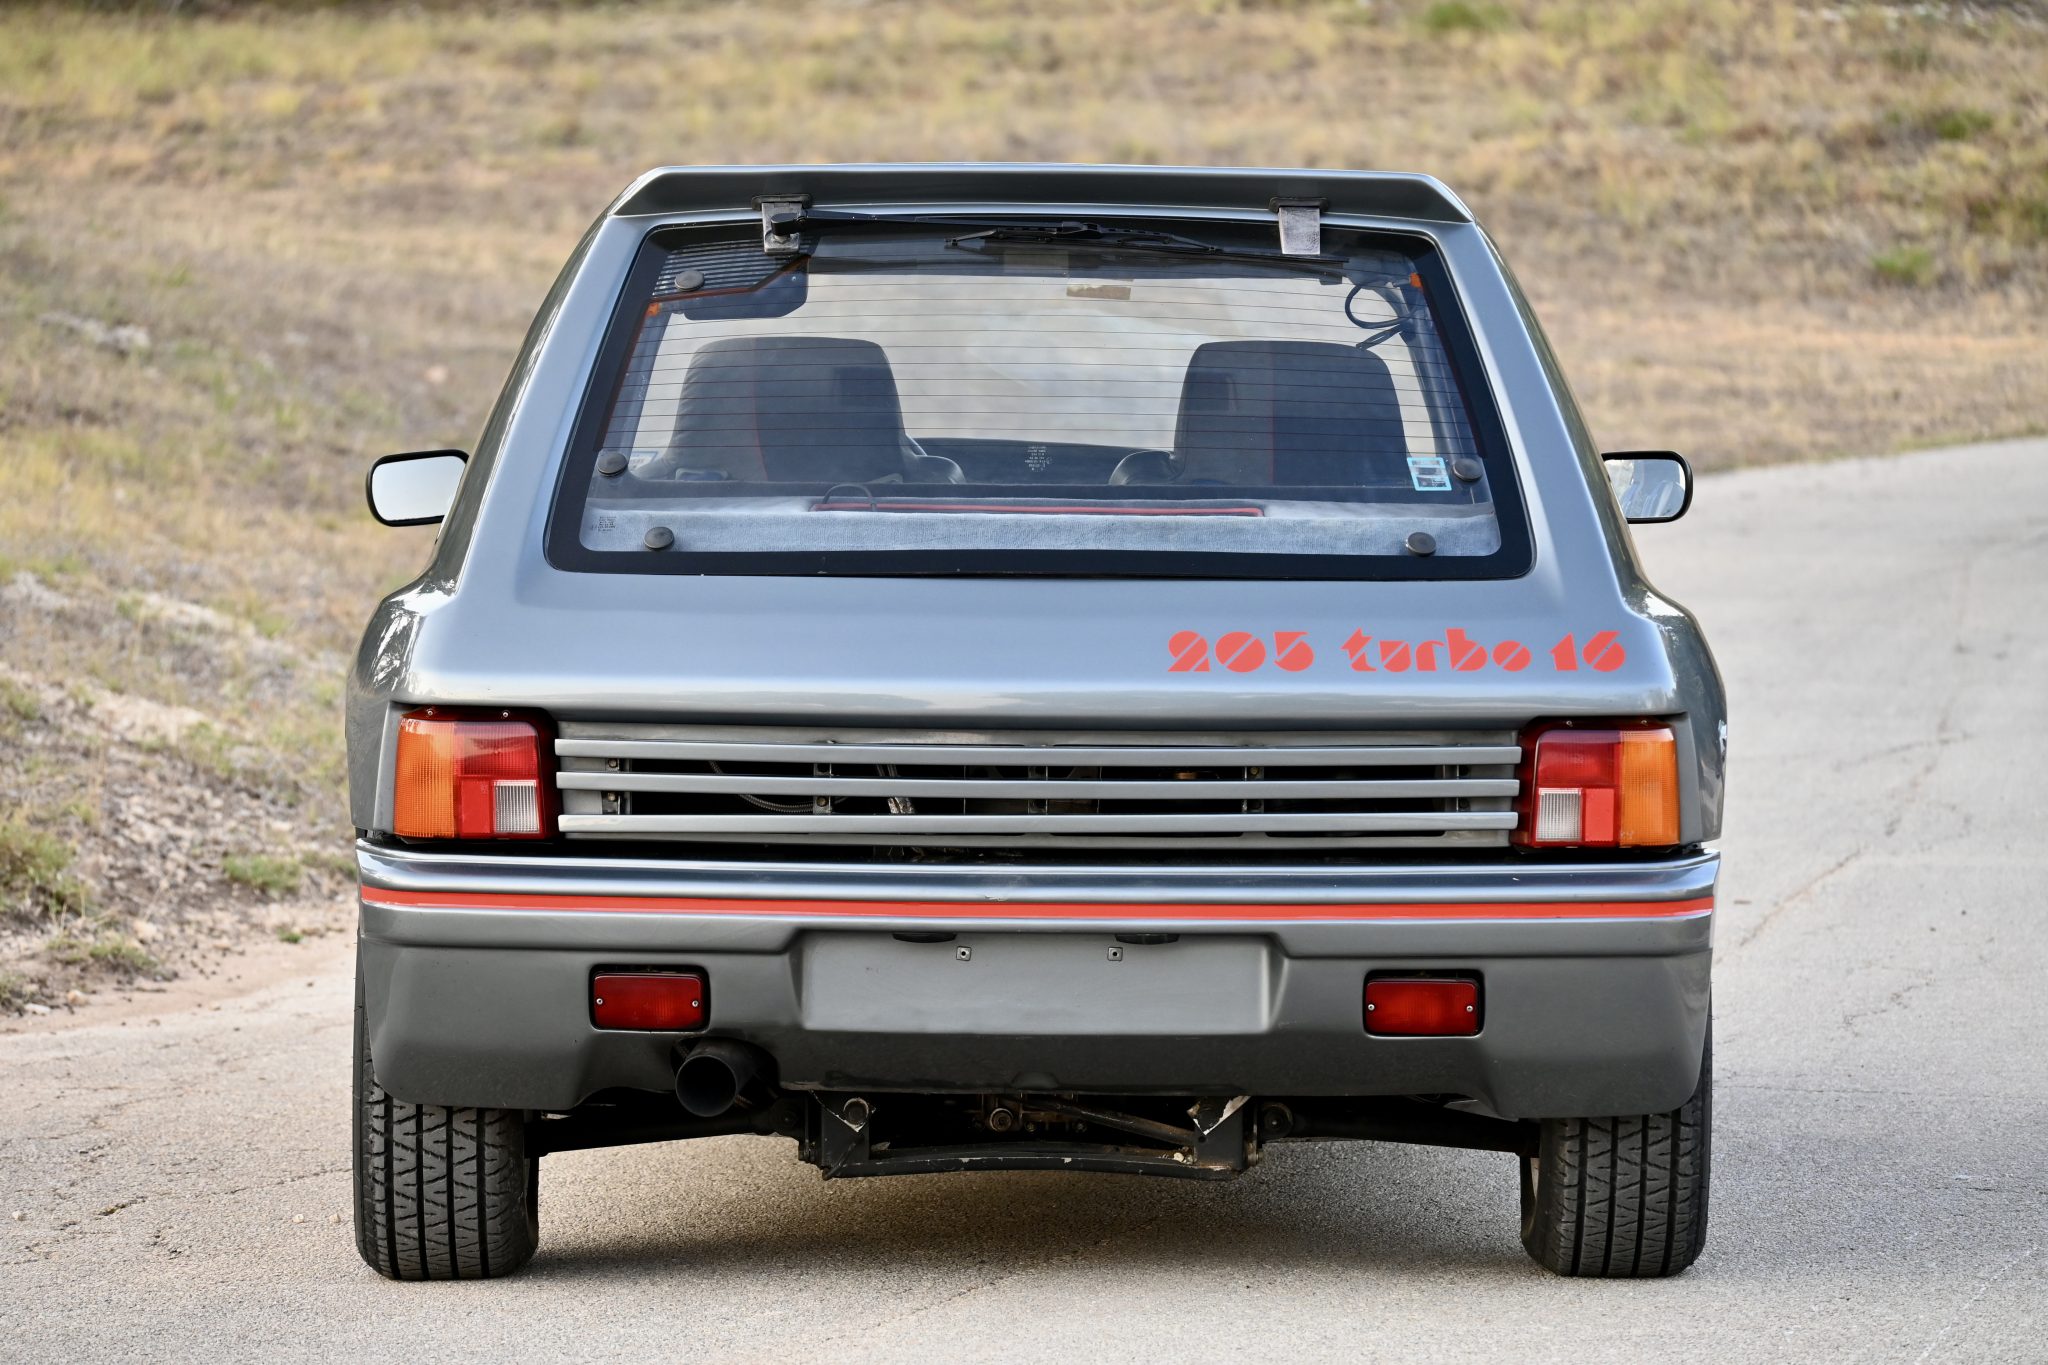 Peugeot 205 Turbo 16 1984 con paquete PTS Clubman (4)